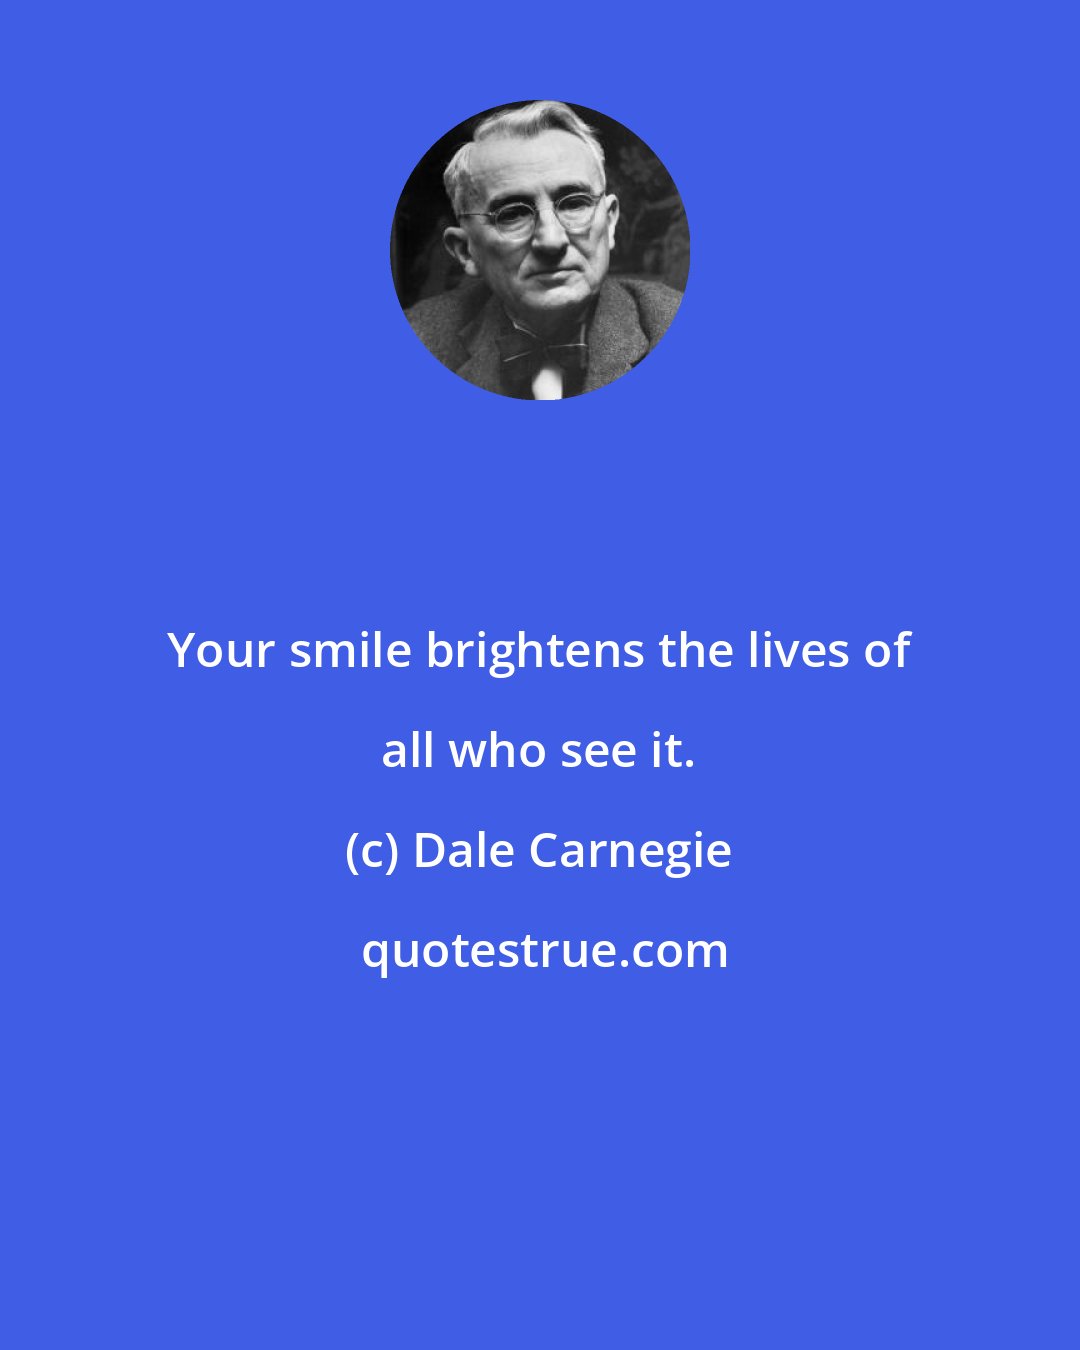 Dale Carnegie: Your smile brightens the lives of all who see it.